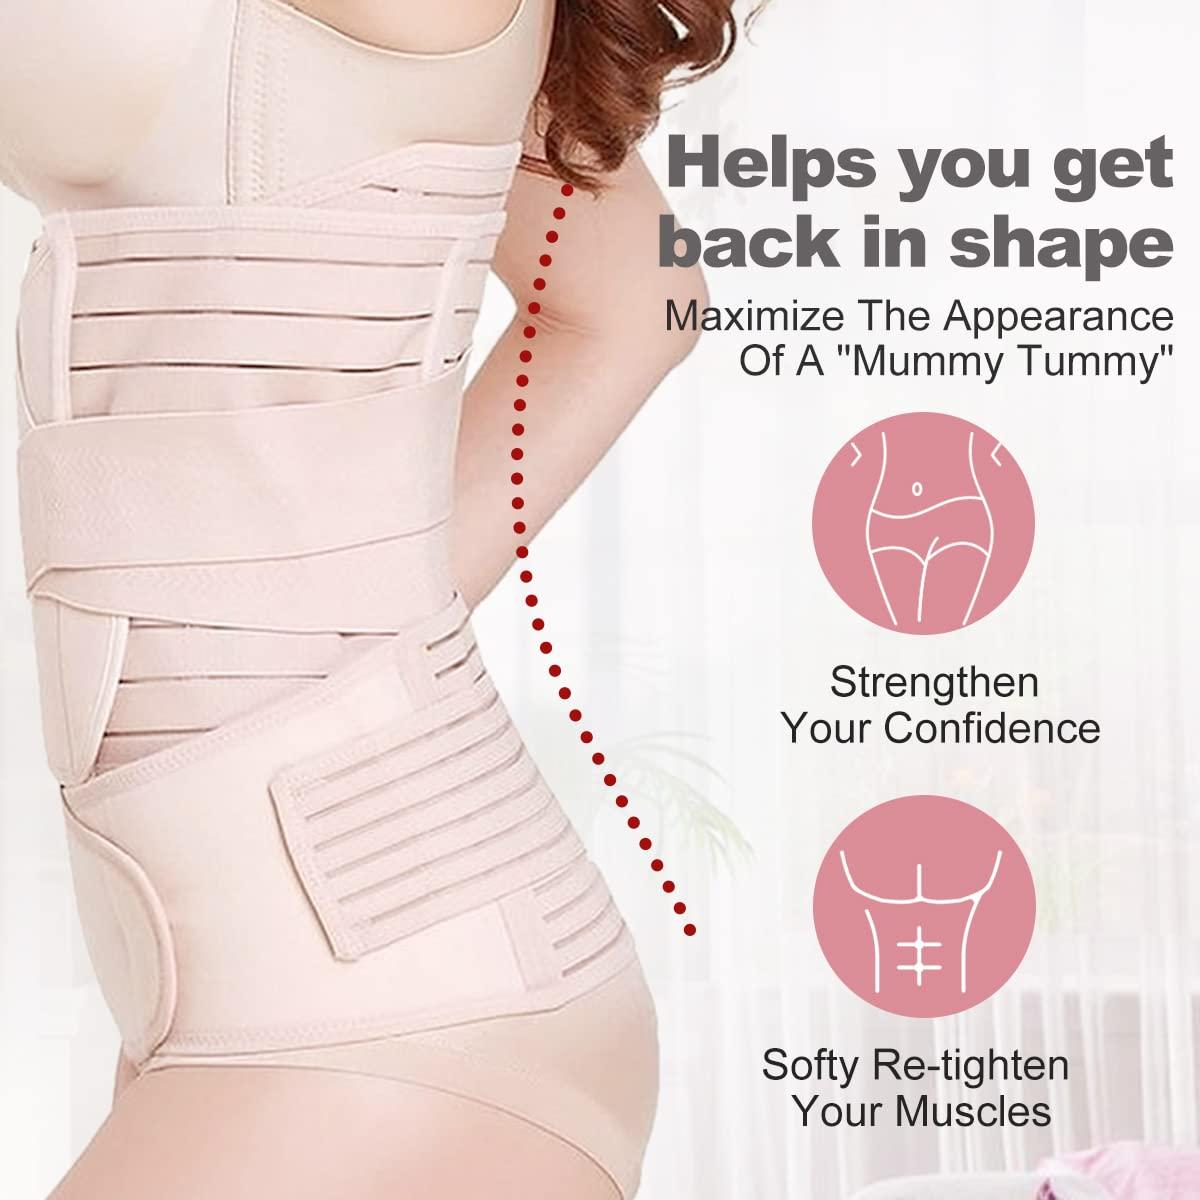 3 In 1 Postpartum Belly Band Wrap - Abdominal Binder Post Surgery C Section  Compression Girdle Belt - After Birth Recovery Support - Postnatal Pelvis  Waist Trainer Slimming Shapewear Body Shaper Classic Lvory Medium-Large